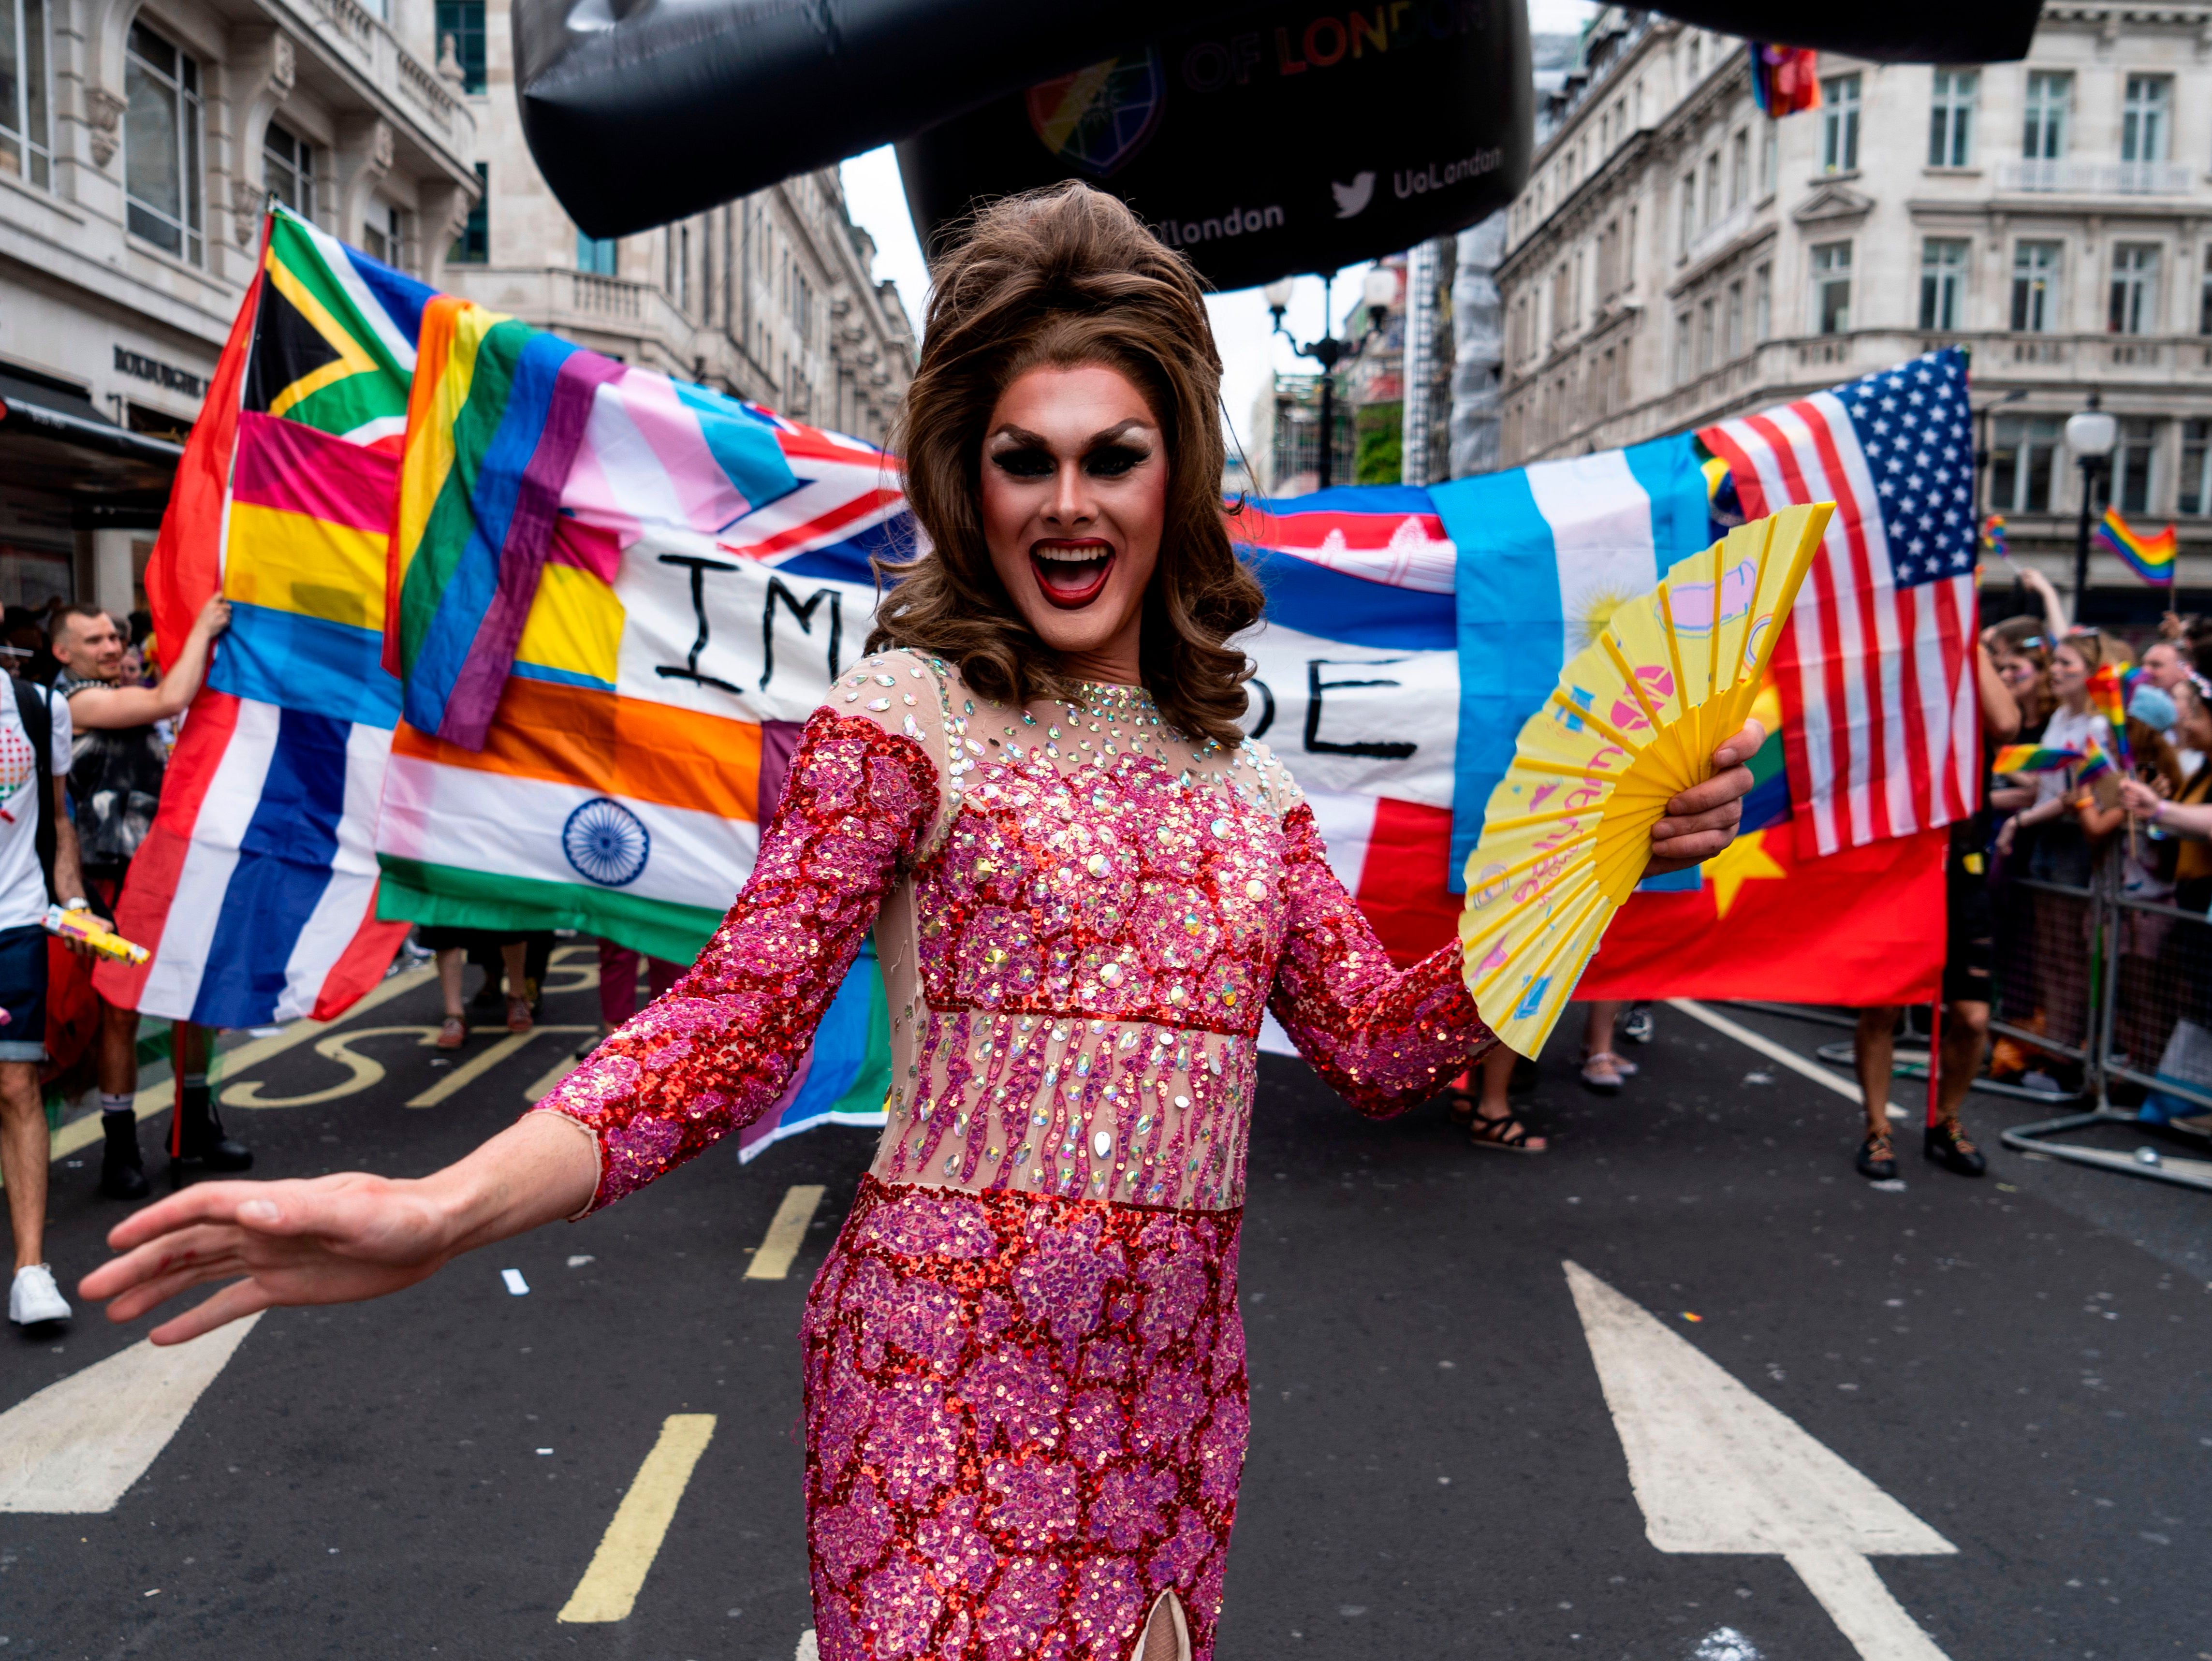 Pride in London had been expected to draw tens of thousands of people